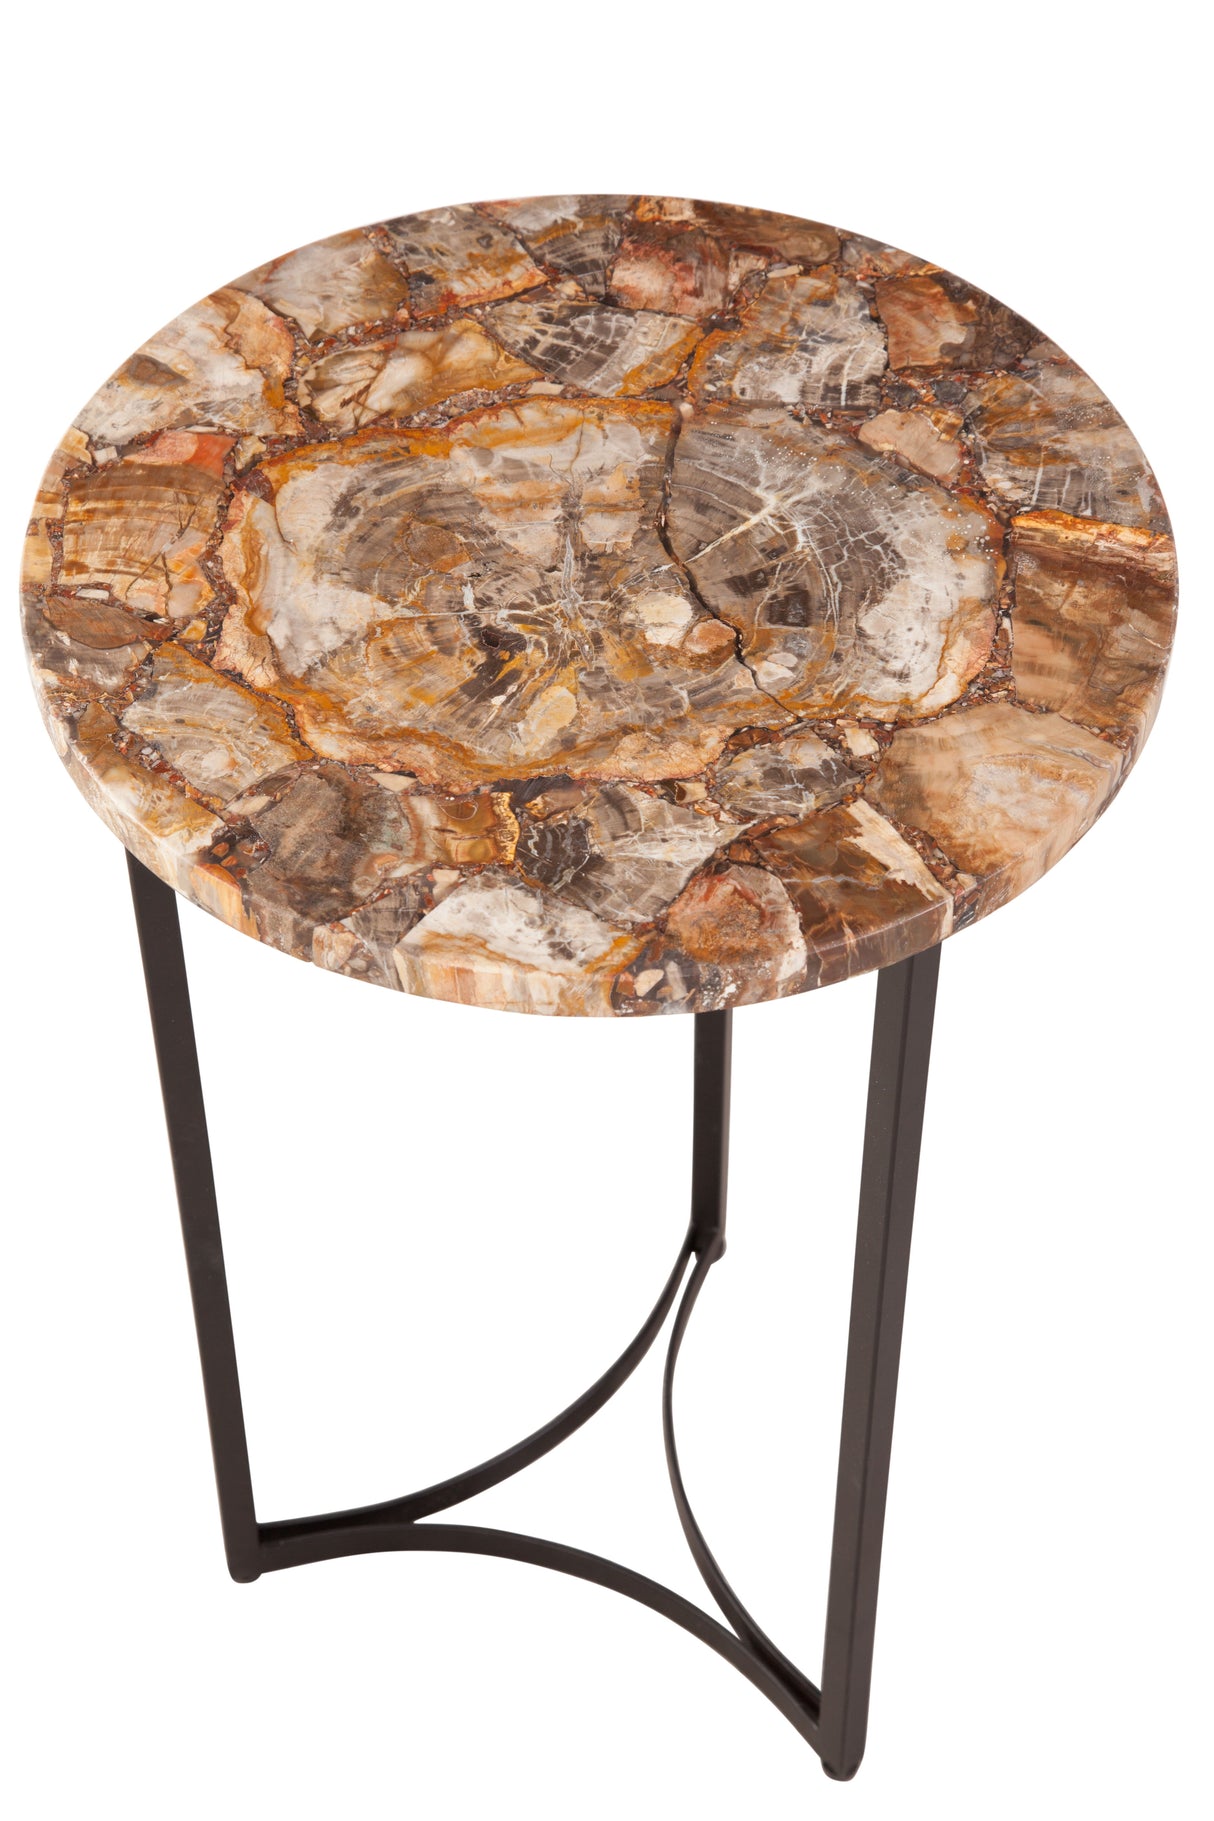 Franklin - Accent Table - Brown